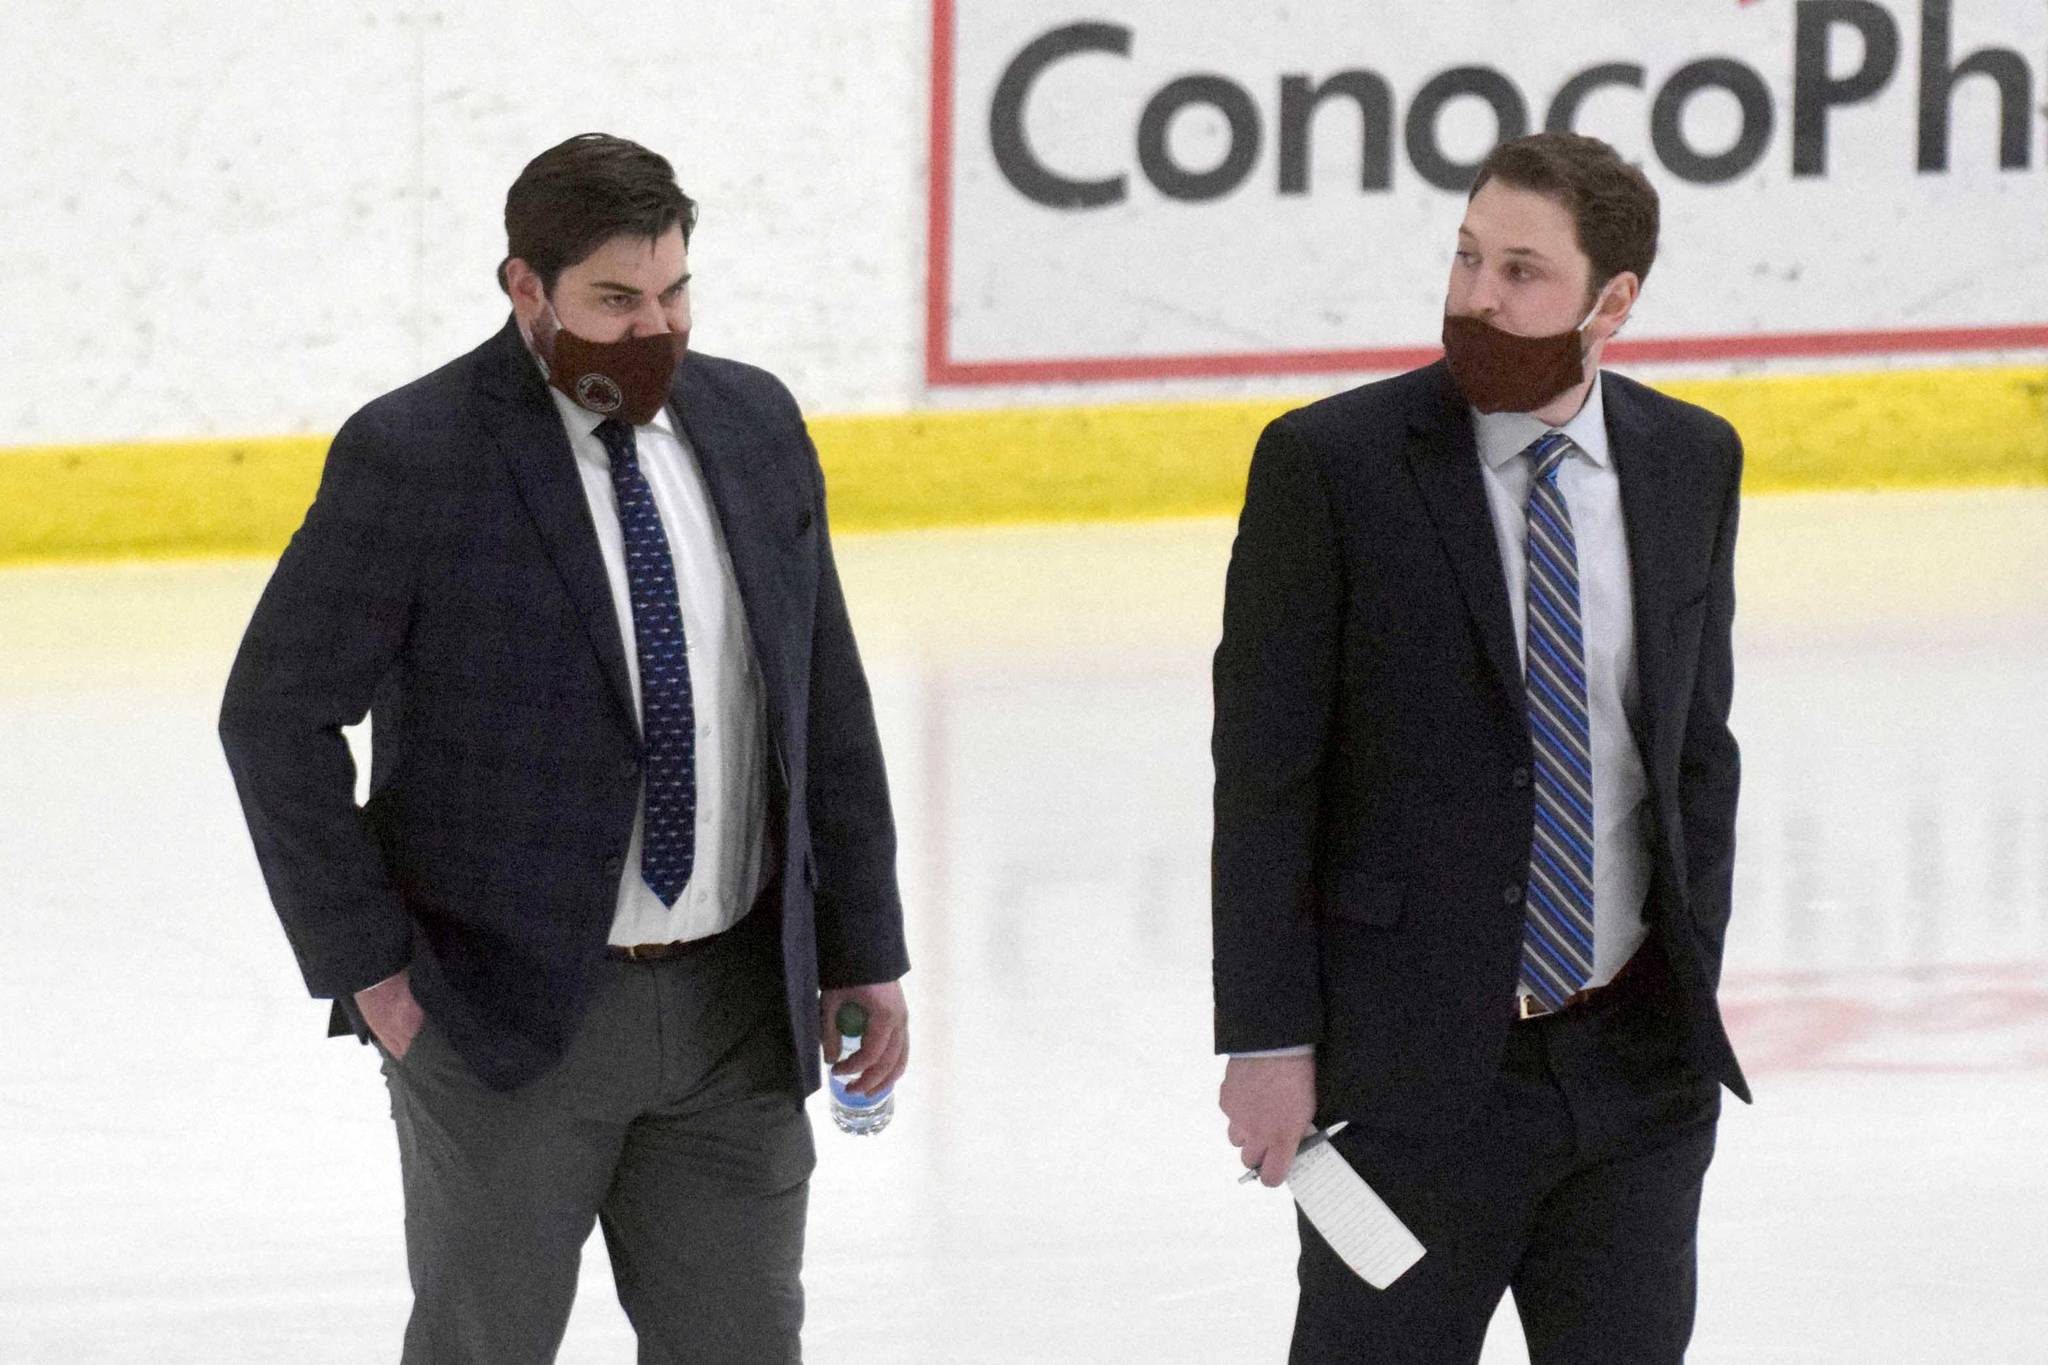 Former Kenai River Brown Bears head coach Kevin Murdock and new head coach Josh Dubinsky take to the ice Friday, April 23, 2021, against the Chippewa (Wisconsin) Steel at the Soldotna Regional Sports Complex in Soldotna, Alaska. (Photo by Jeff Helminiak/Peninsula Clarion)